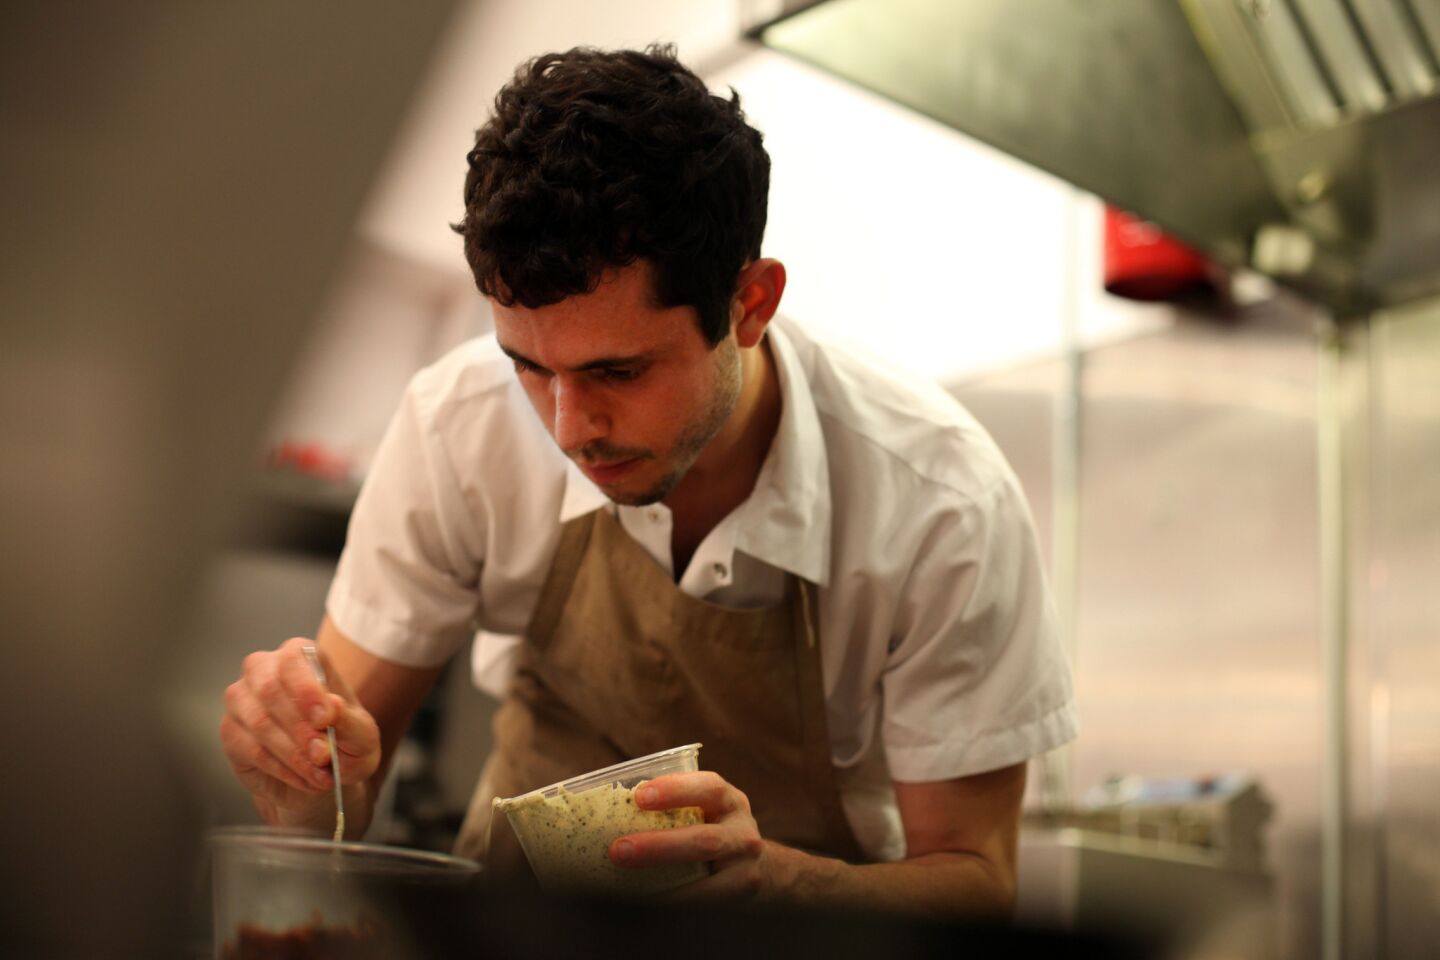 Alma chef Ari Taymor was just named one of Food & Wine Magazine's Best New Chefs of 2013.